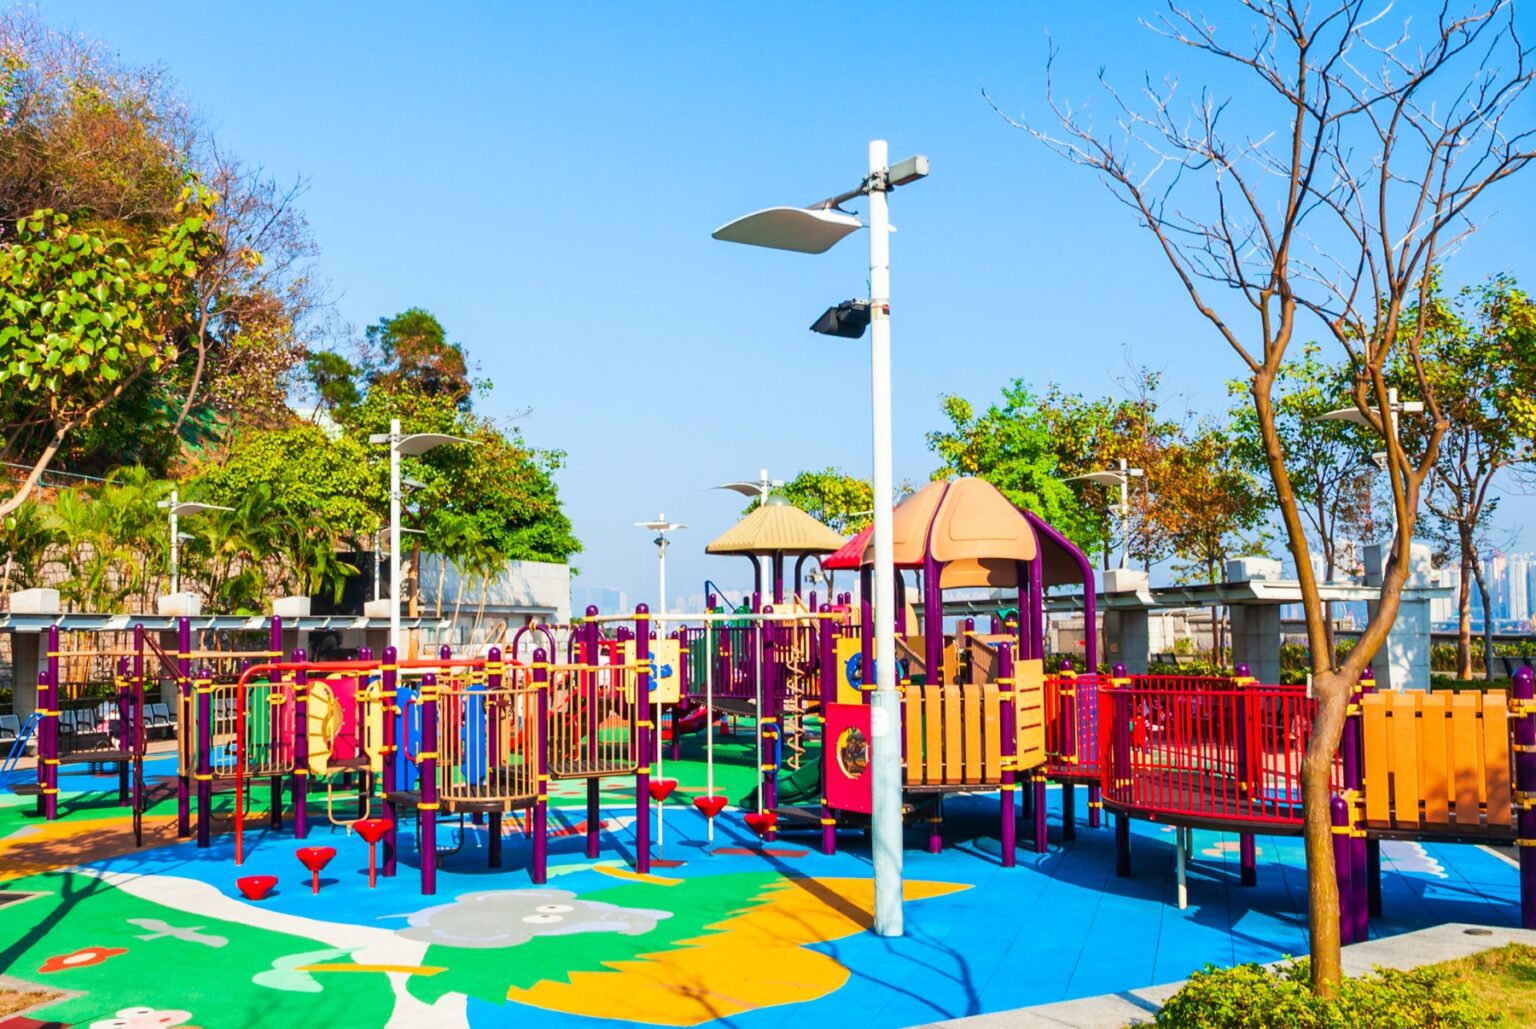 an outdoor playground in hong kong with play equipment like slide